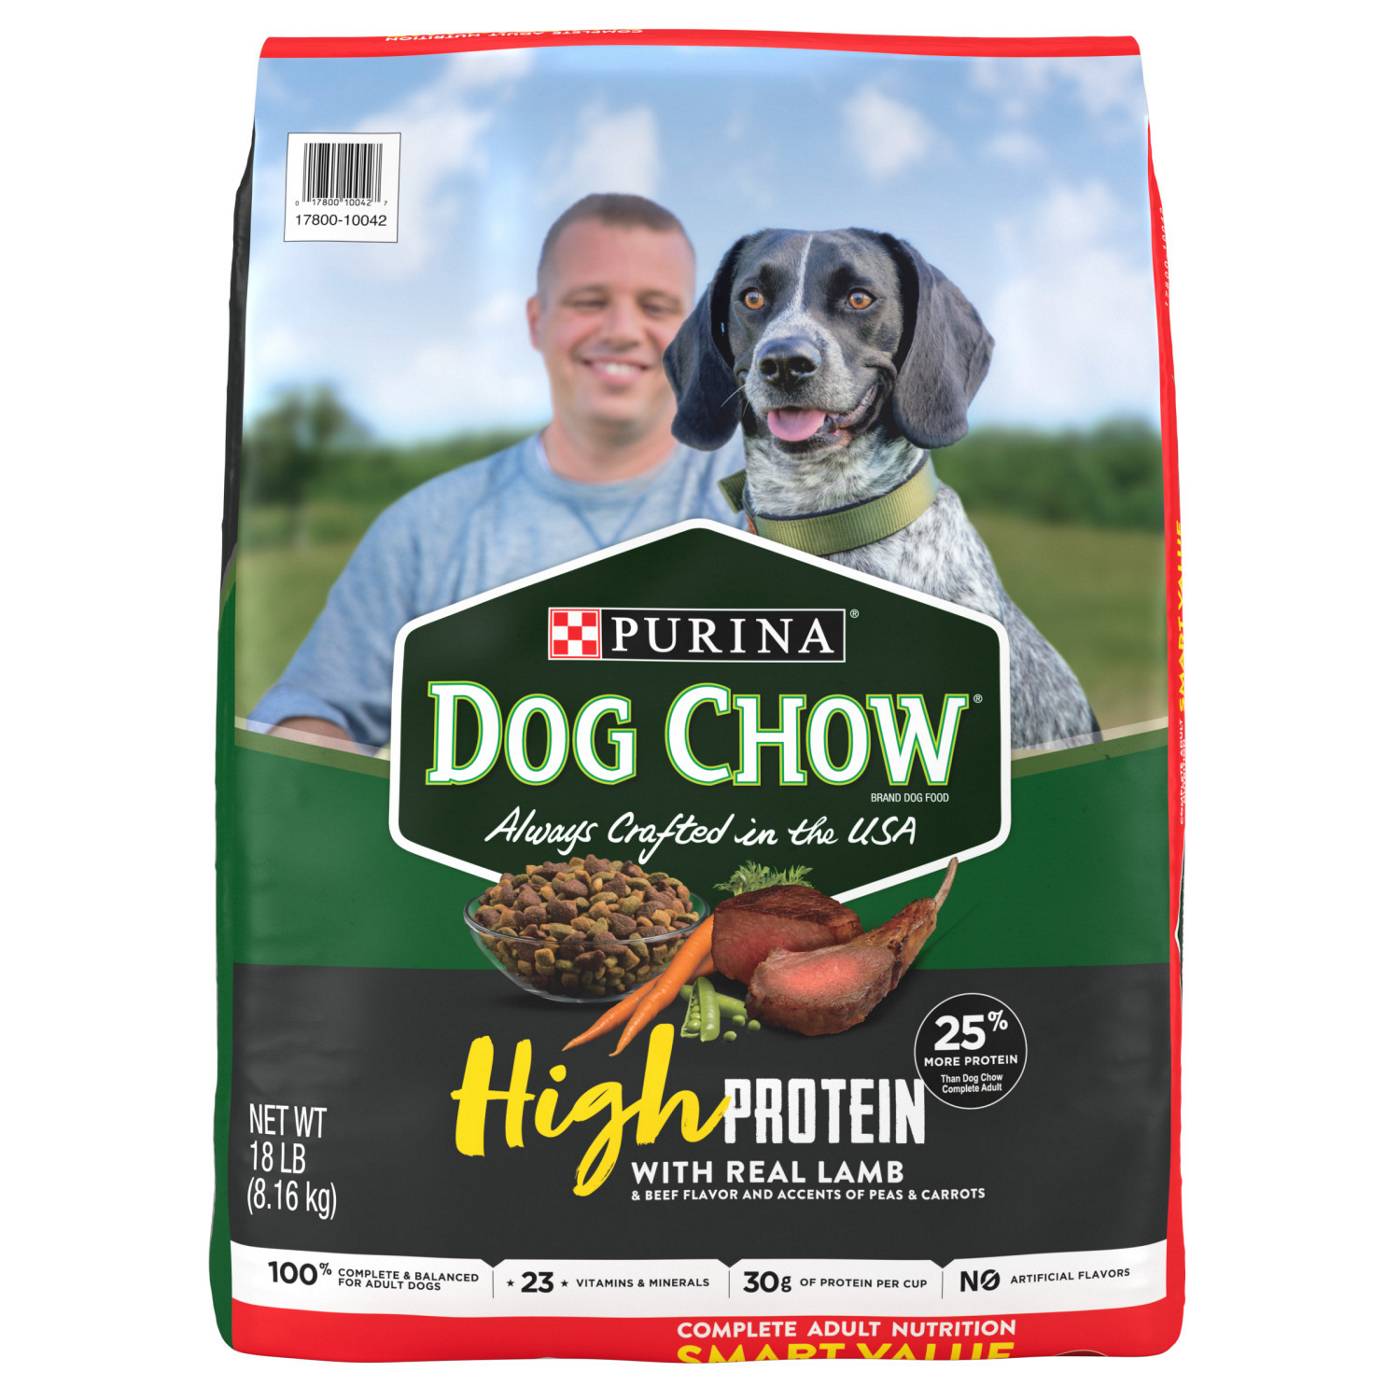 Dog Chow Purina Dog Chow High Protein Dry Dog Food, High Protein Recipe With Real Lamb & Beef Flavor; image 1 of 7